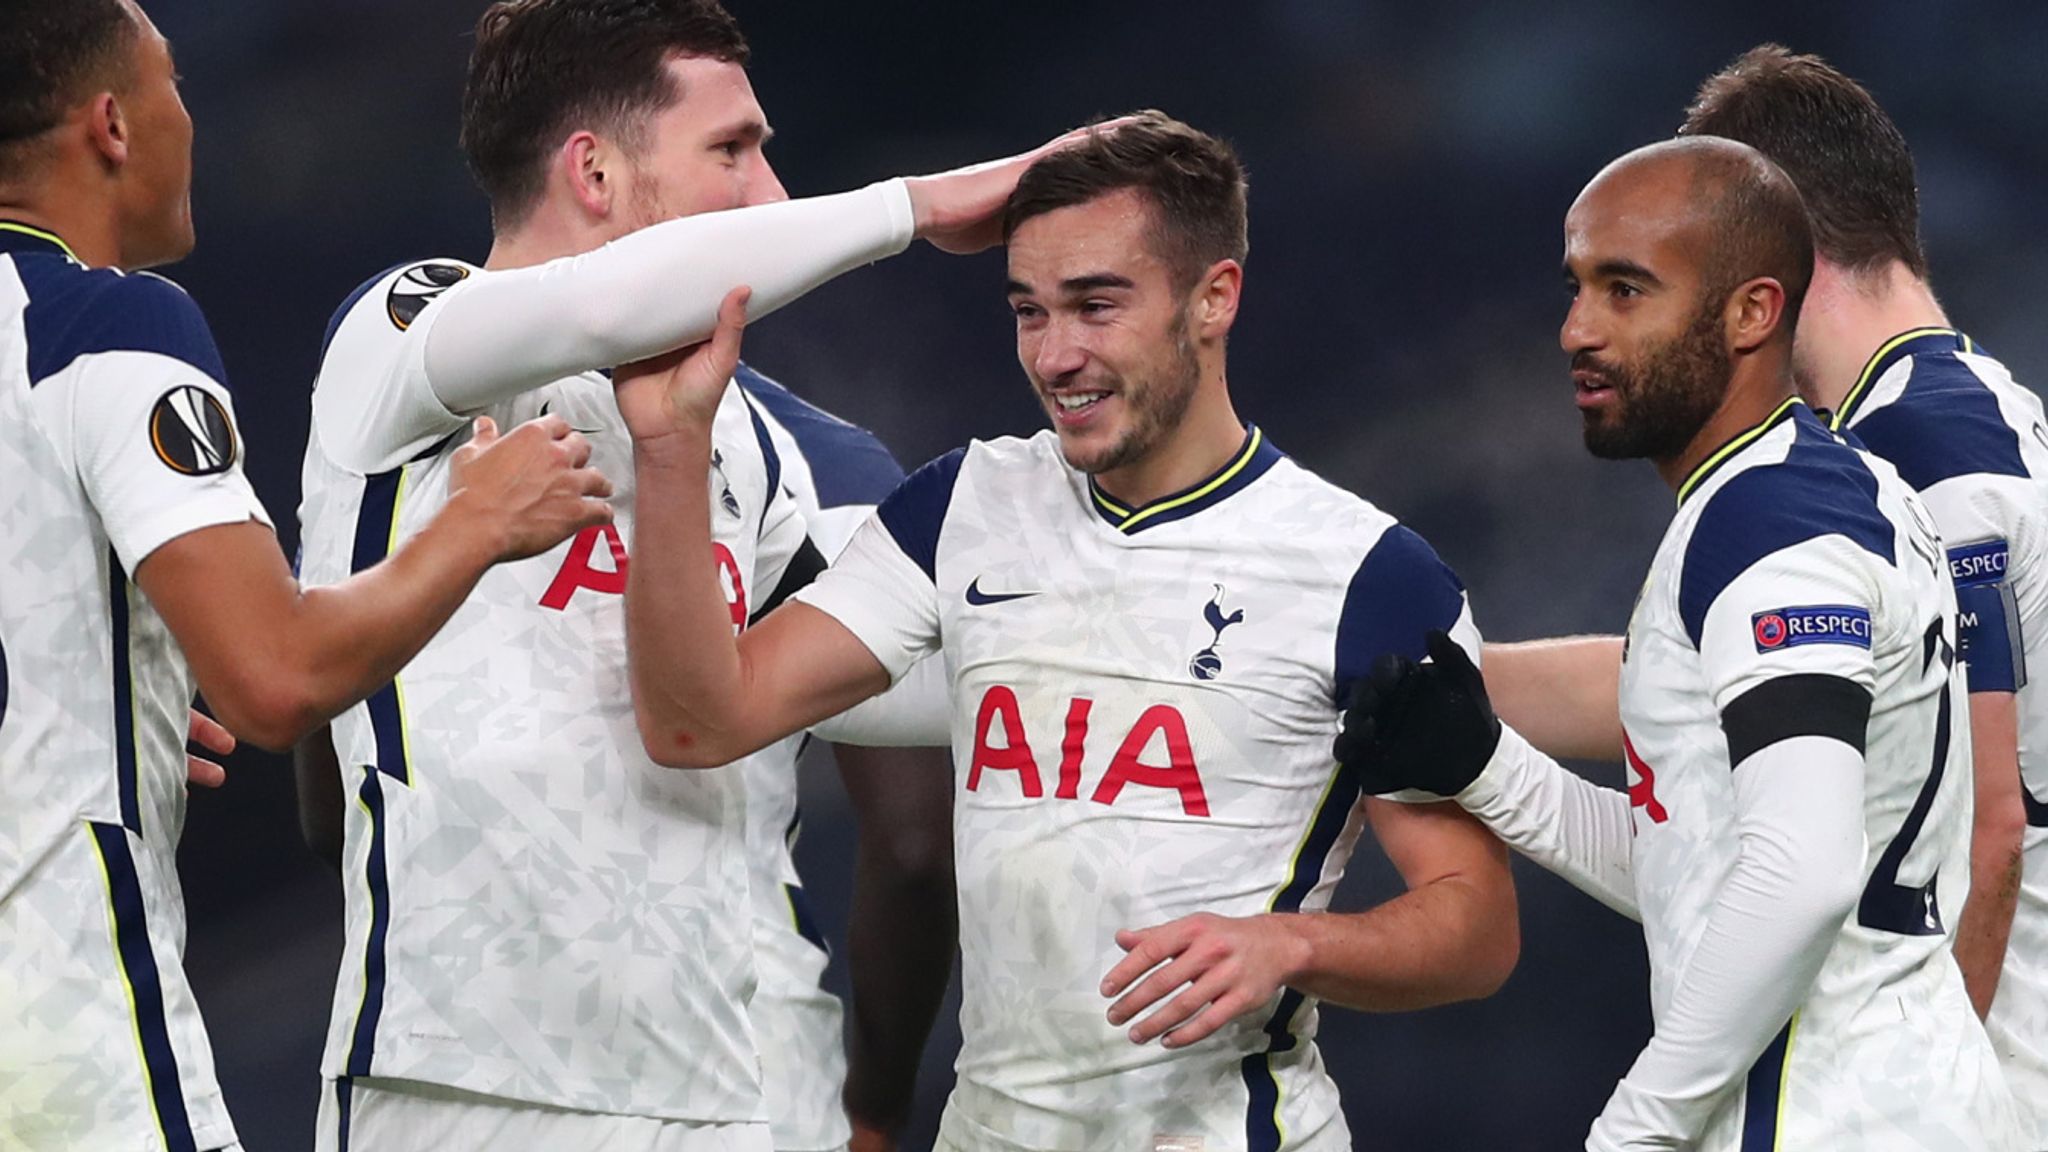 Tottenham 4-0 Ludogorets: Carlos Vinicius' double sets Spurs on way to big victory | Football News | Sky Sports